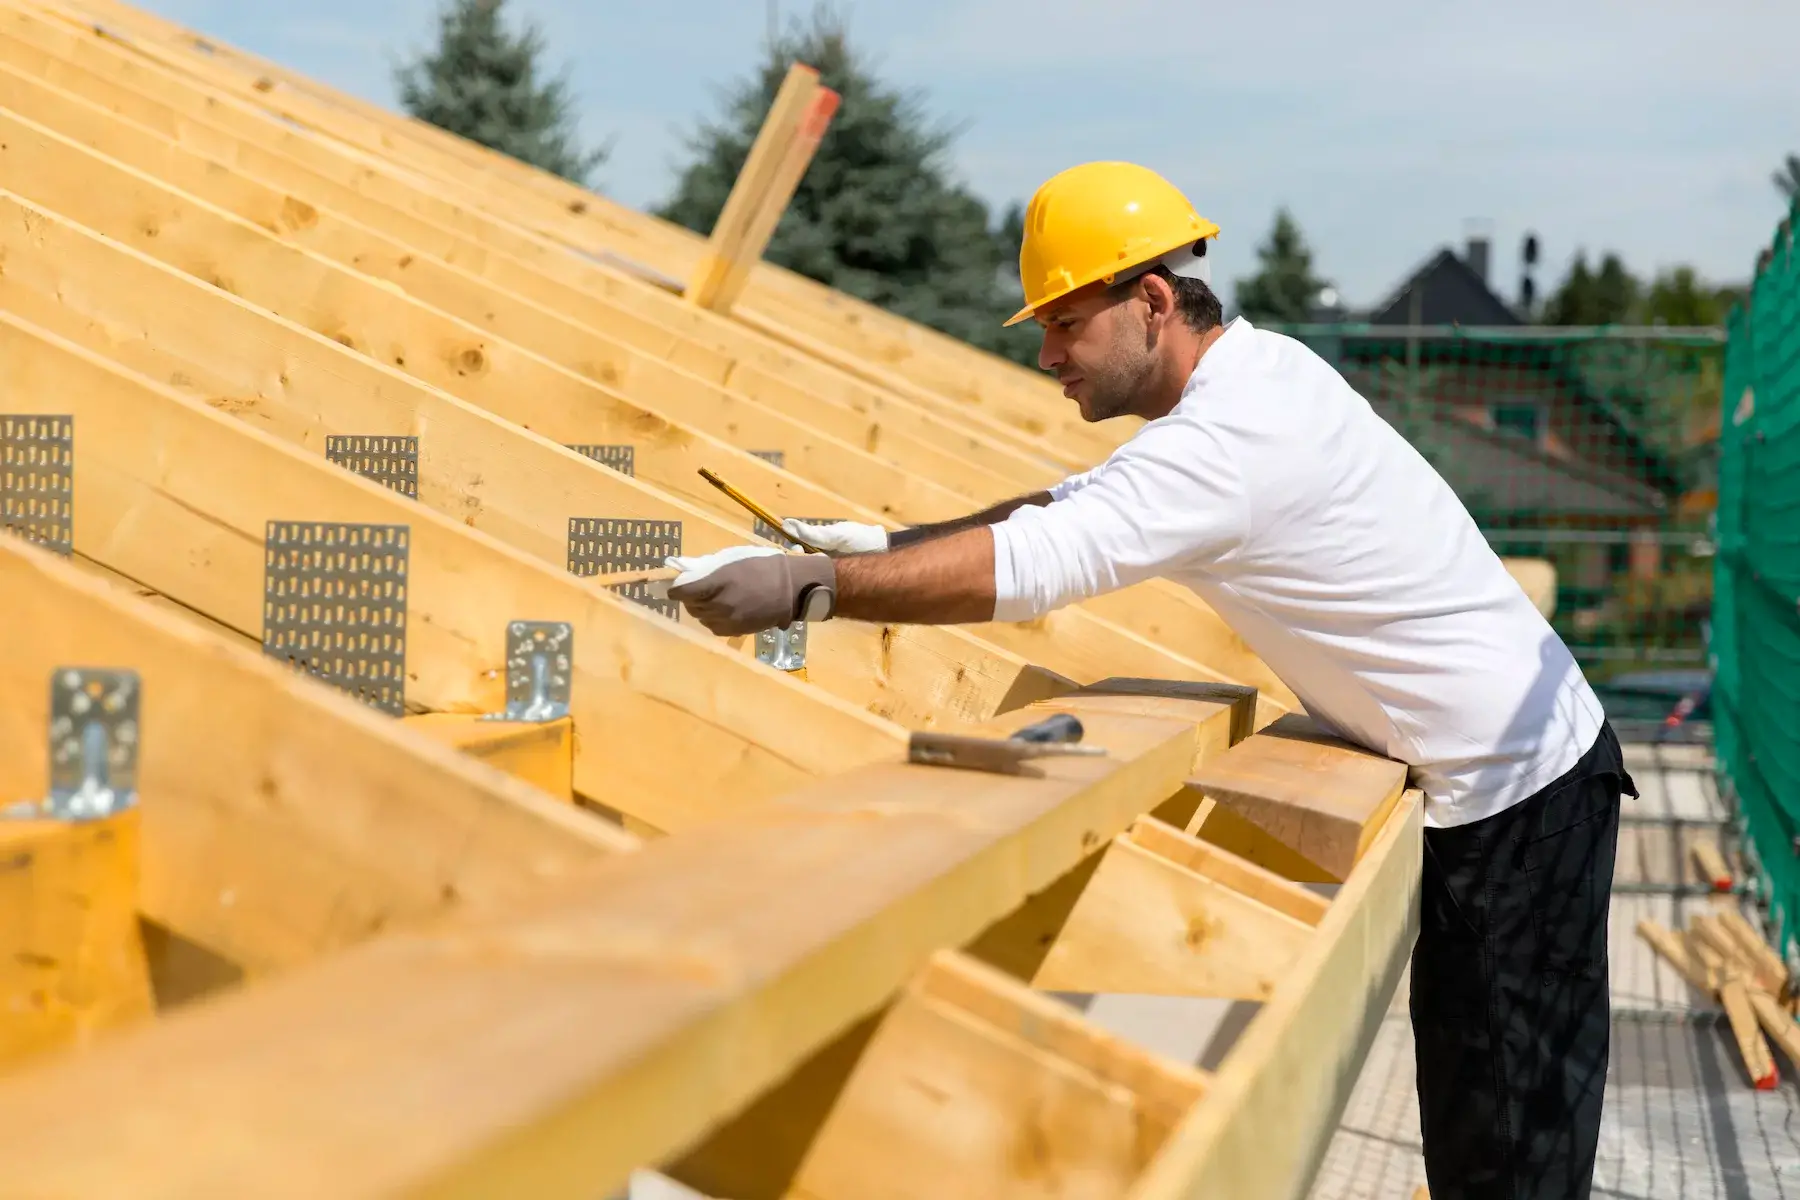 A construction worker wears a safety hat and gloves while focused on building a wooden roof